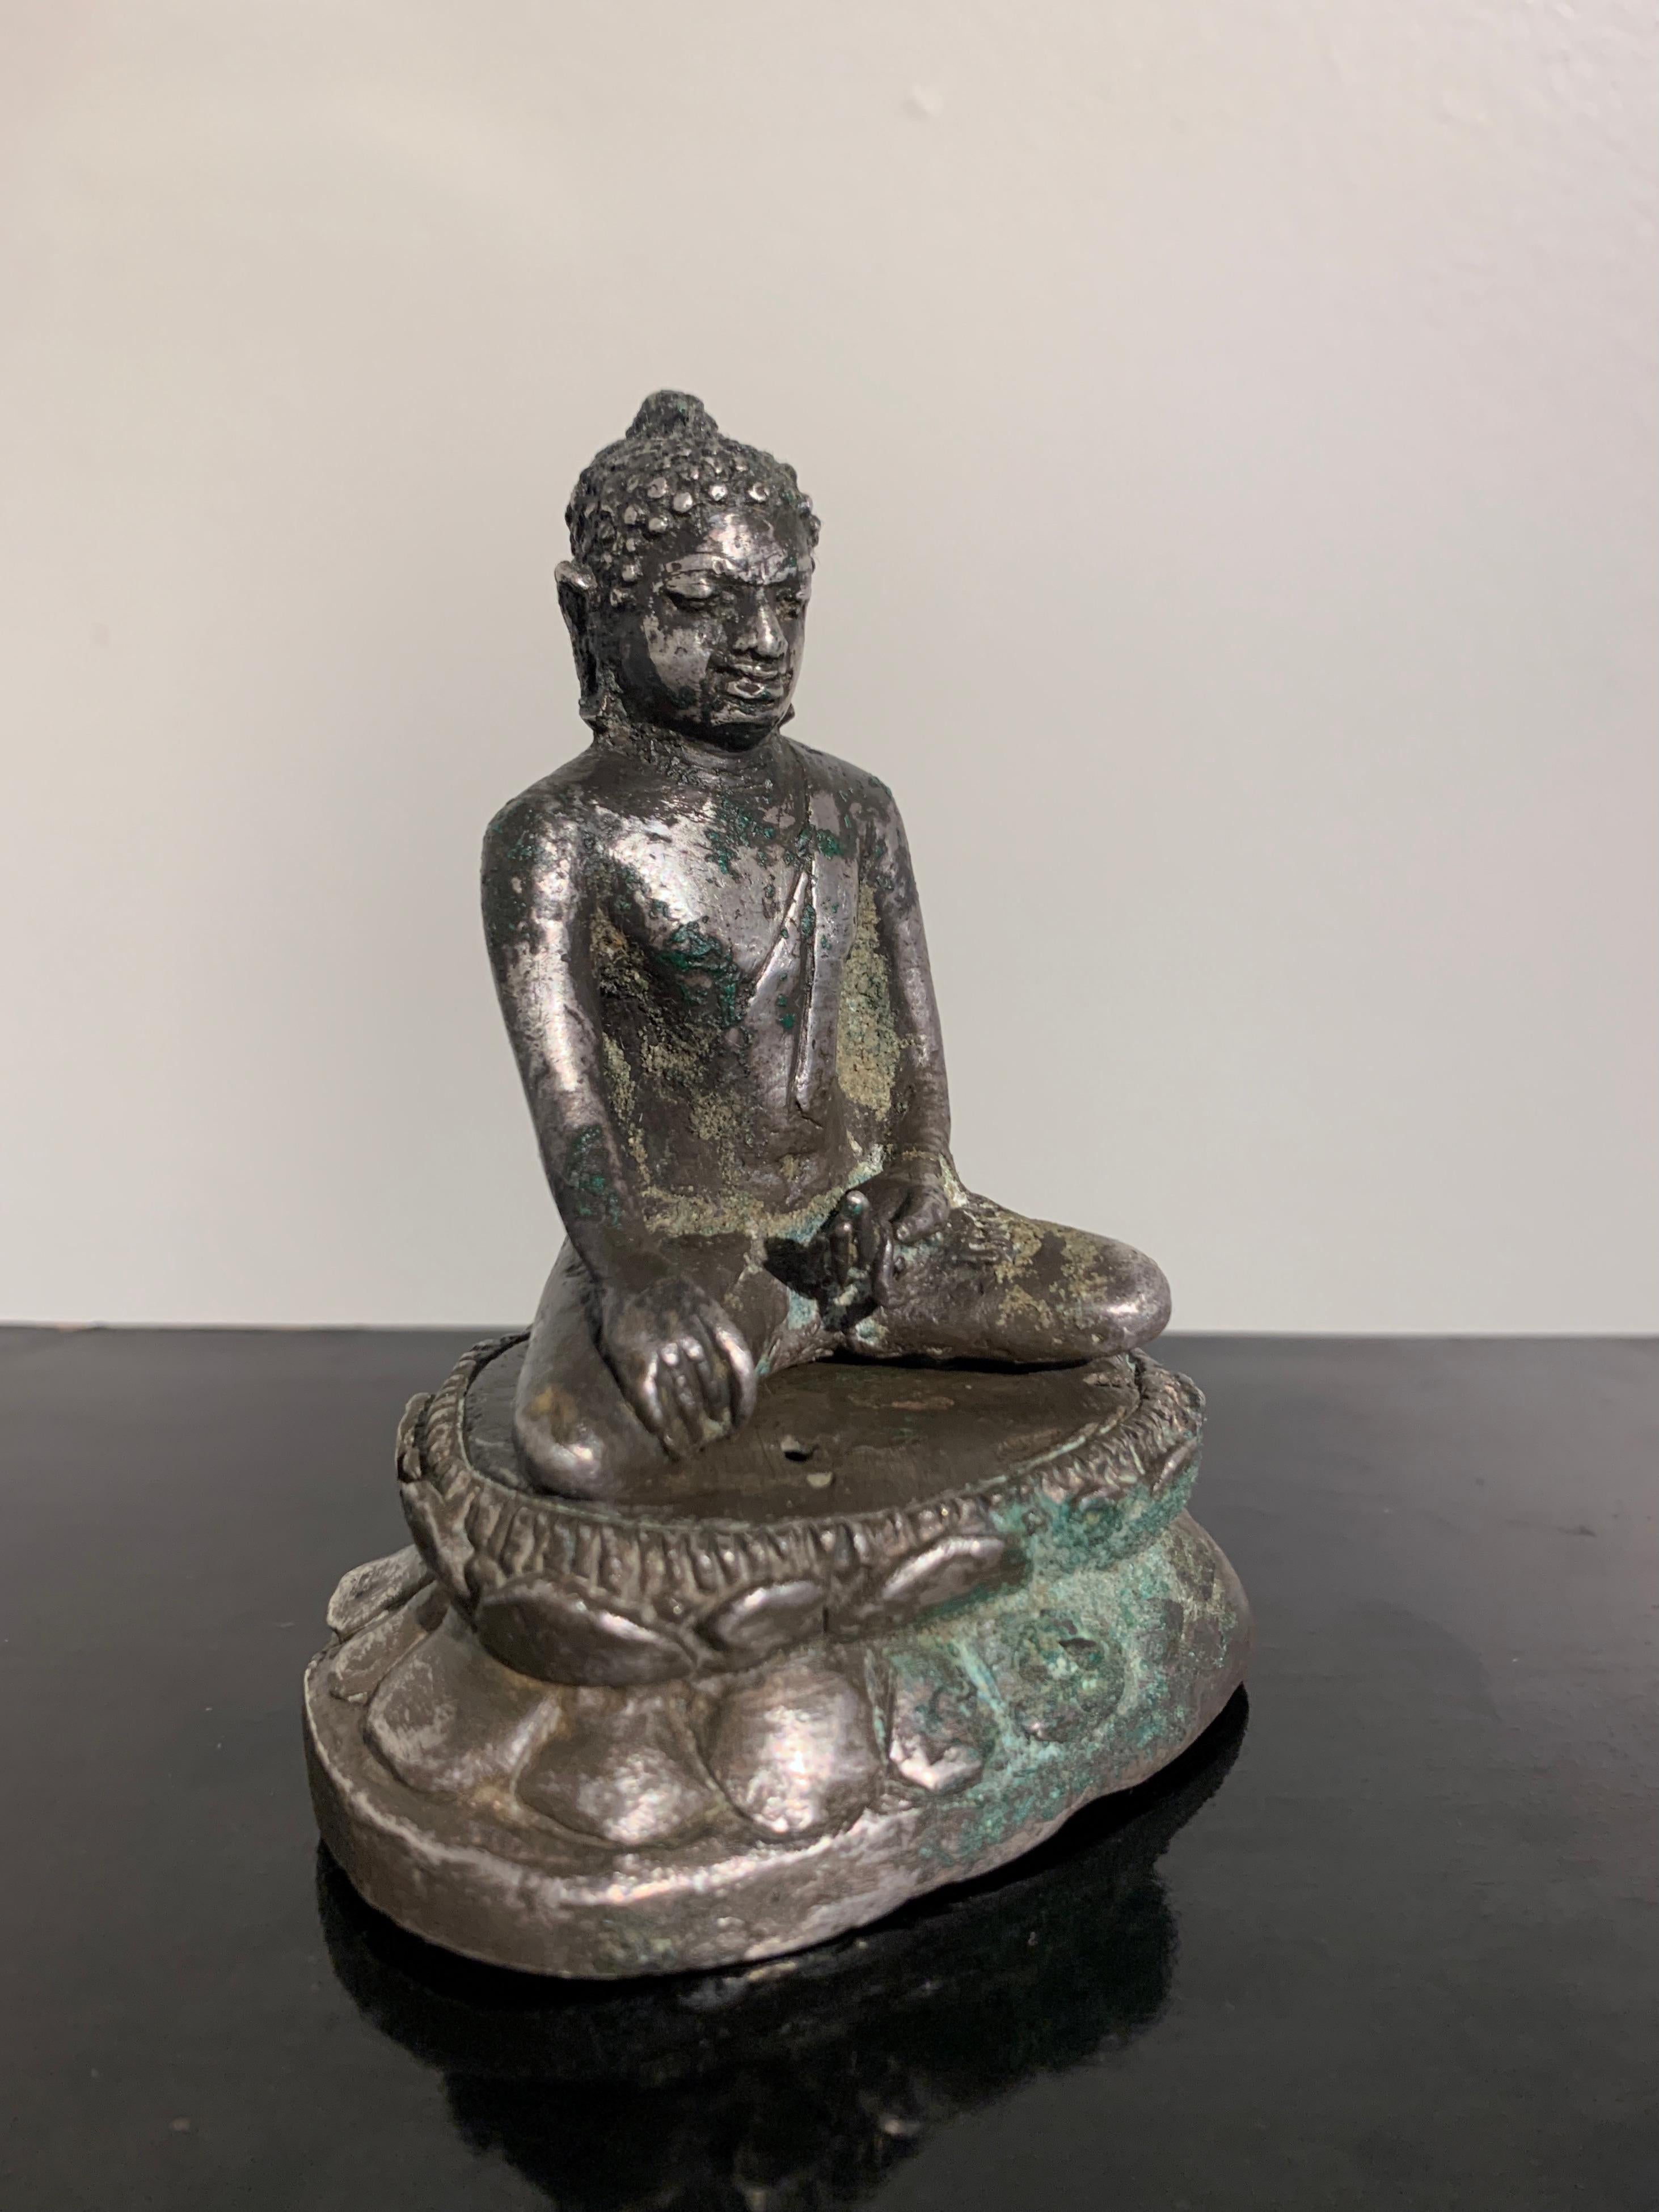 An exceedingly rare Javanese cast silver figure a Transcendent Buddha, probably the Dhayani Buddha Akshobhya, early classical Javanese period, 9th - 12th century, Java, Indonesia. 

Cast in silver, the esoteric Buddha, tentatively identified as